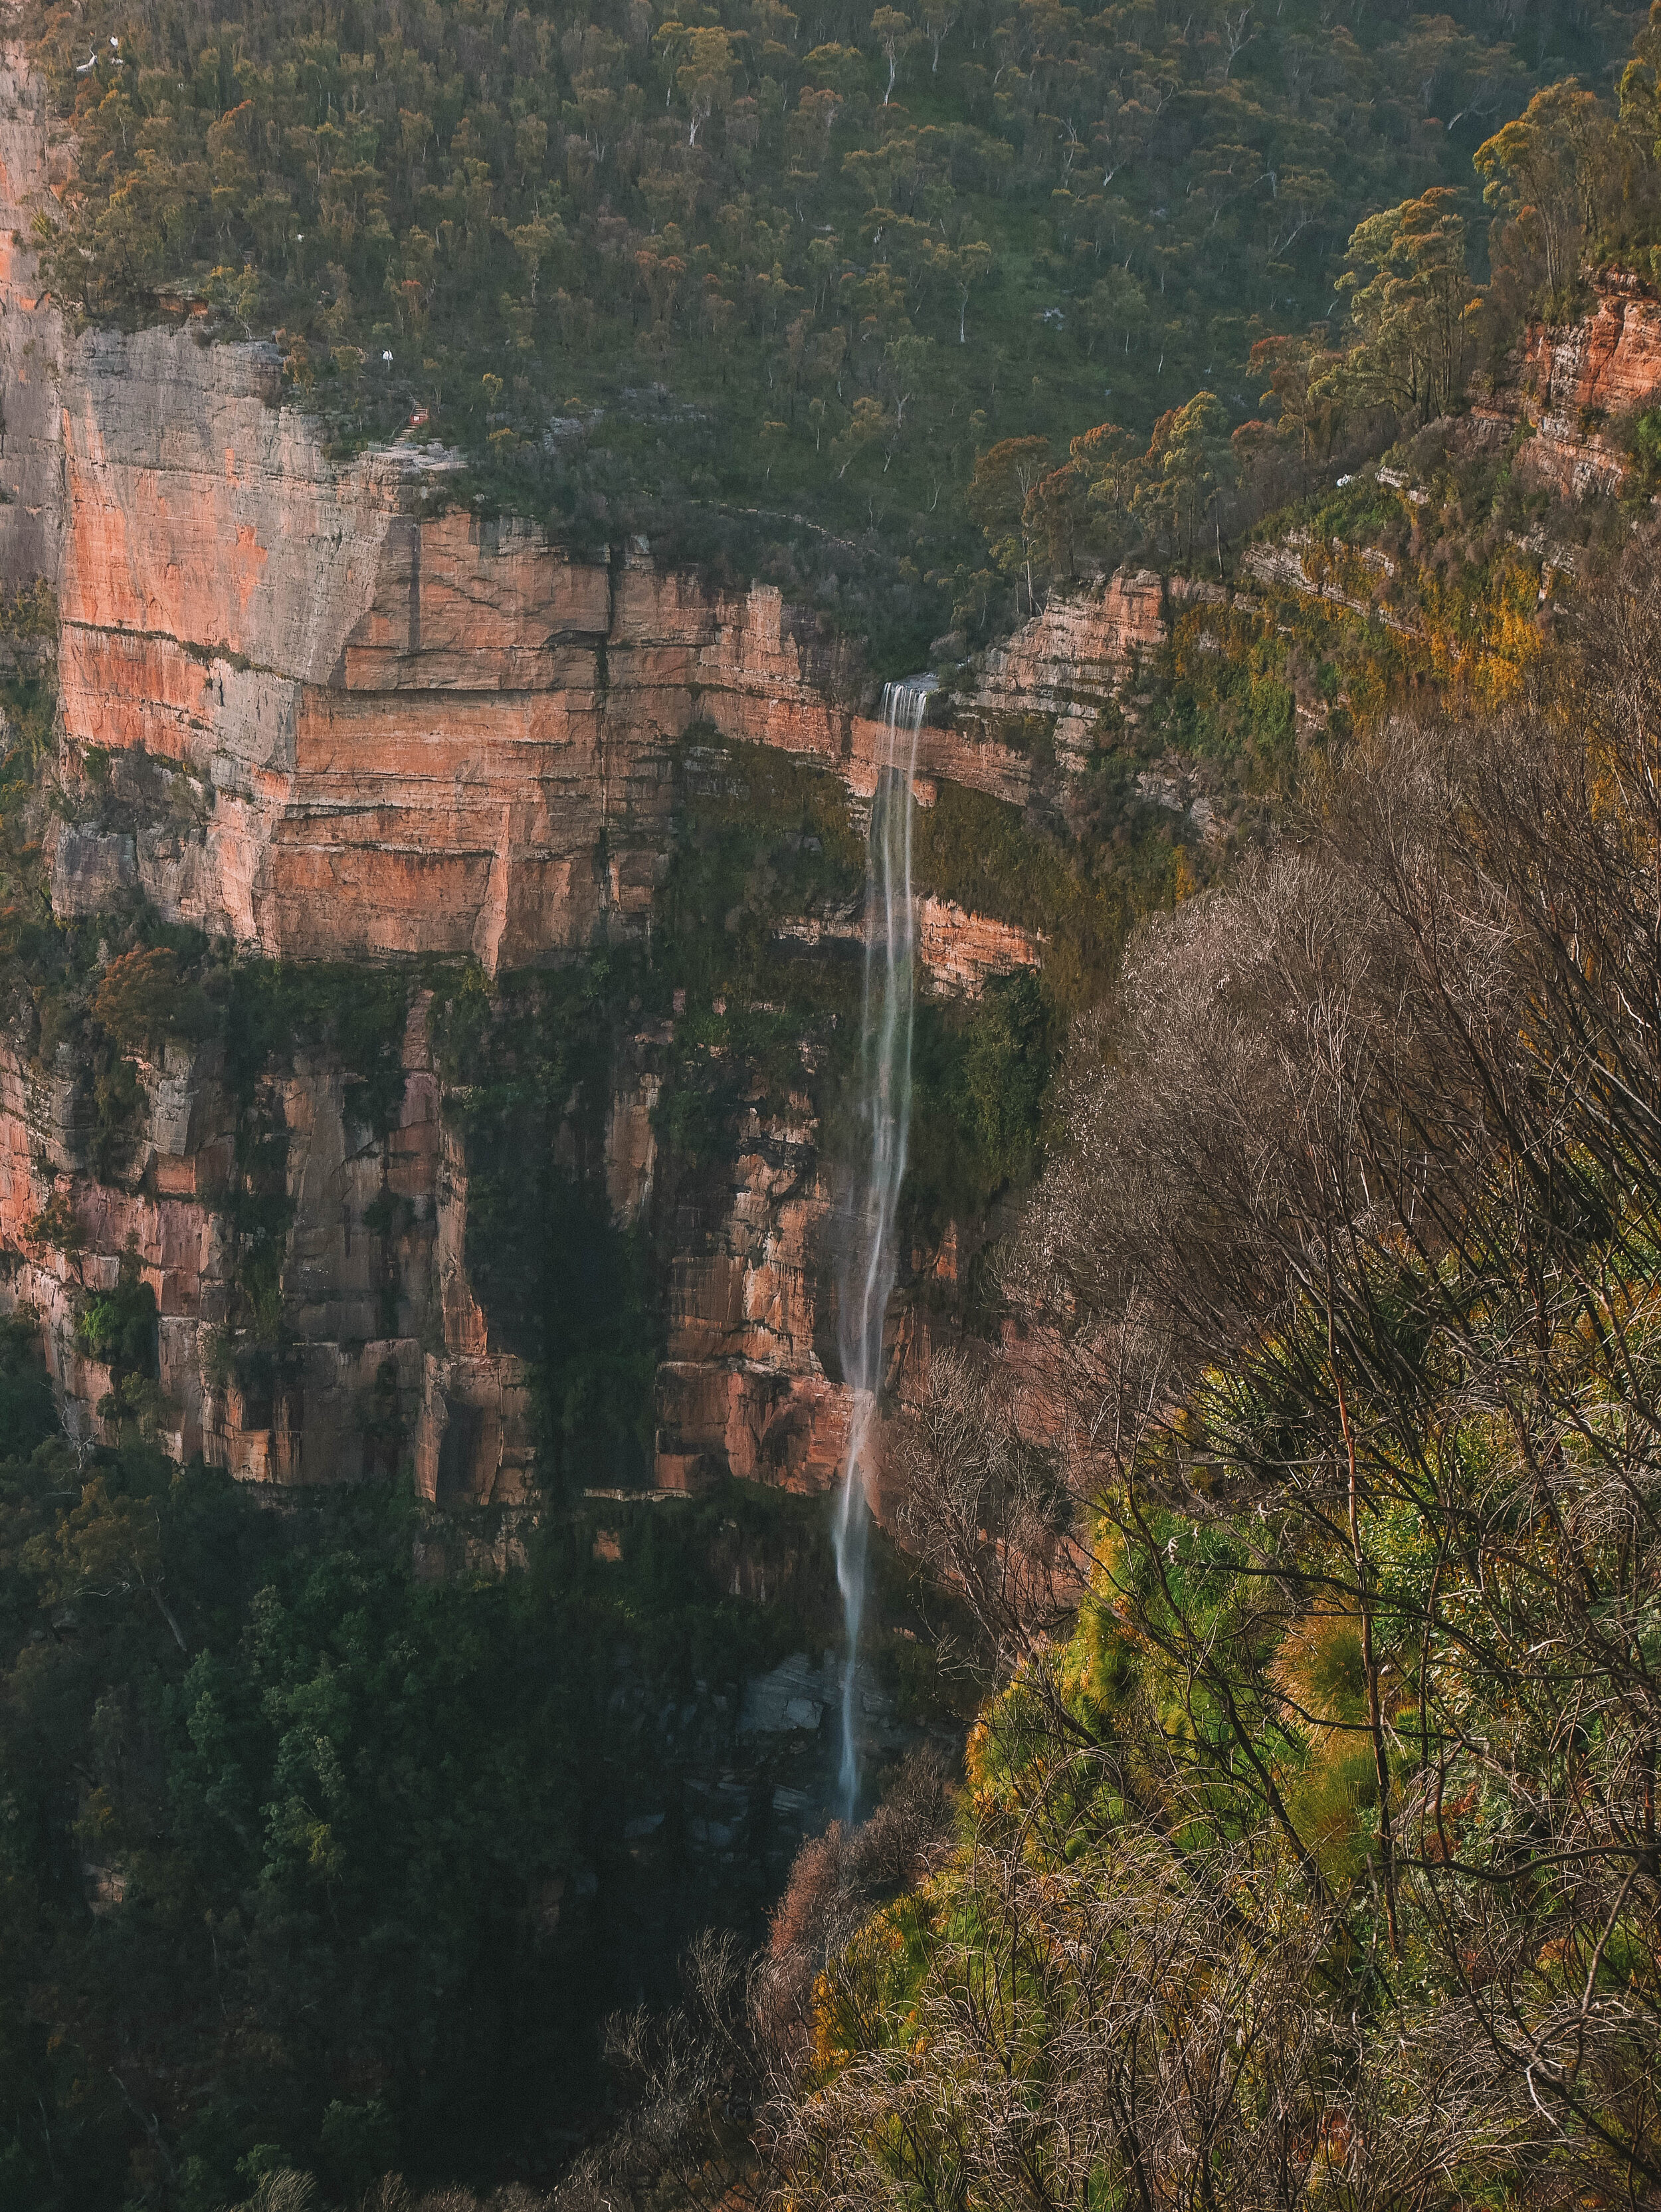 Waterfall in the background - Govetts Leap - Blue Mountains - New South Wales (NSW) - Australia